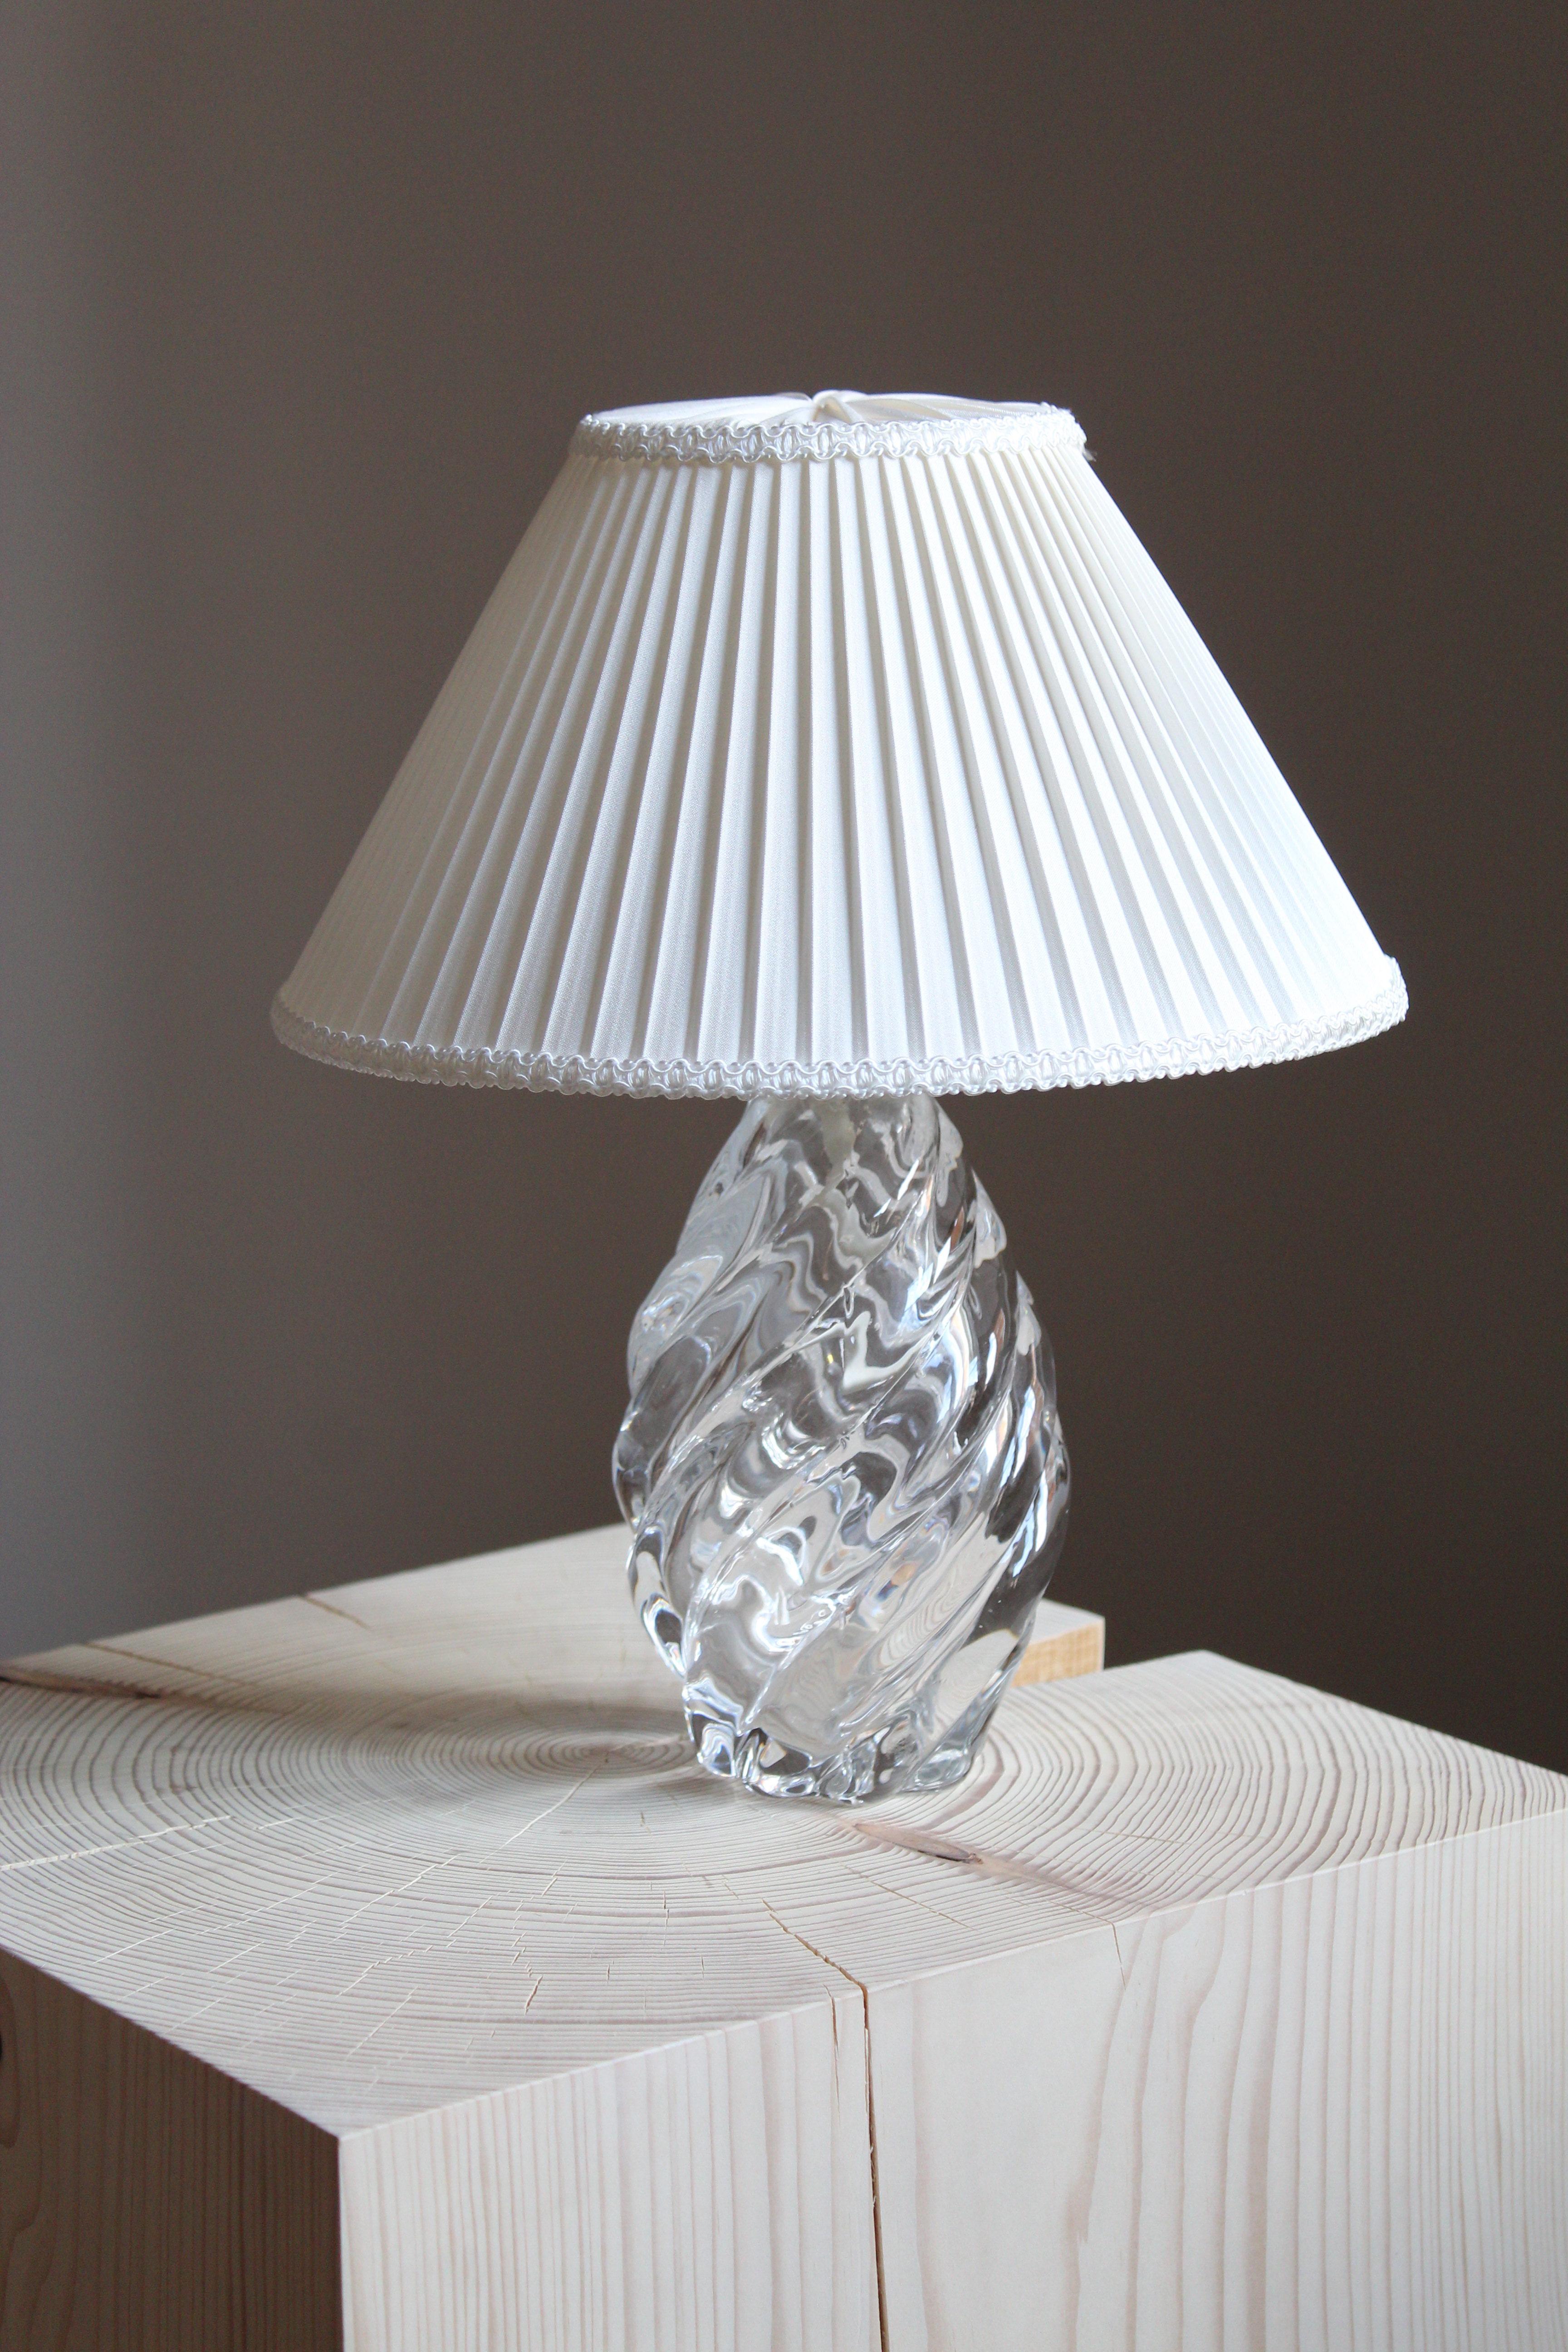 A highly modernist organic table lamp. Of Swedish production, produced by Reijmyre Glasbruk. In blown glass, 1950s. 

Other designers of the period include Paavo Tynell, Josef Frank, Lisa Johansson-Pape, and Alvar Aalto.